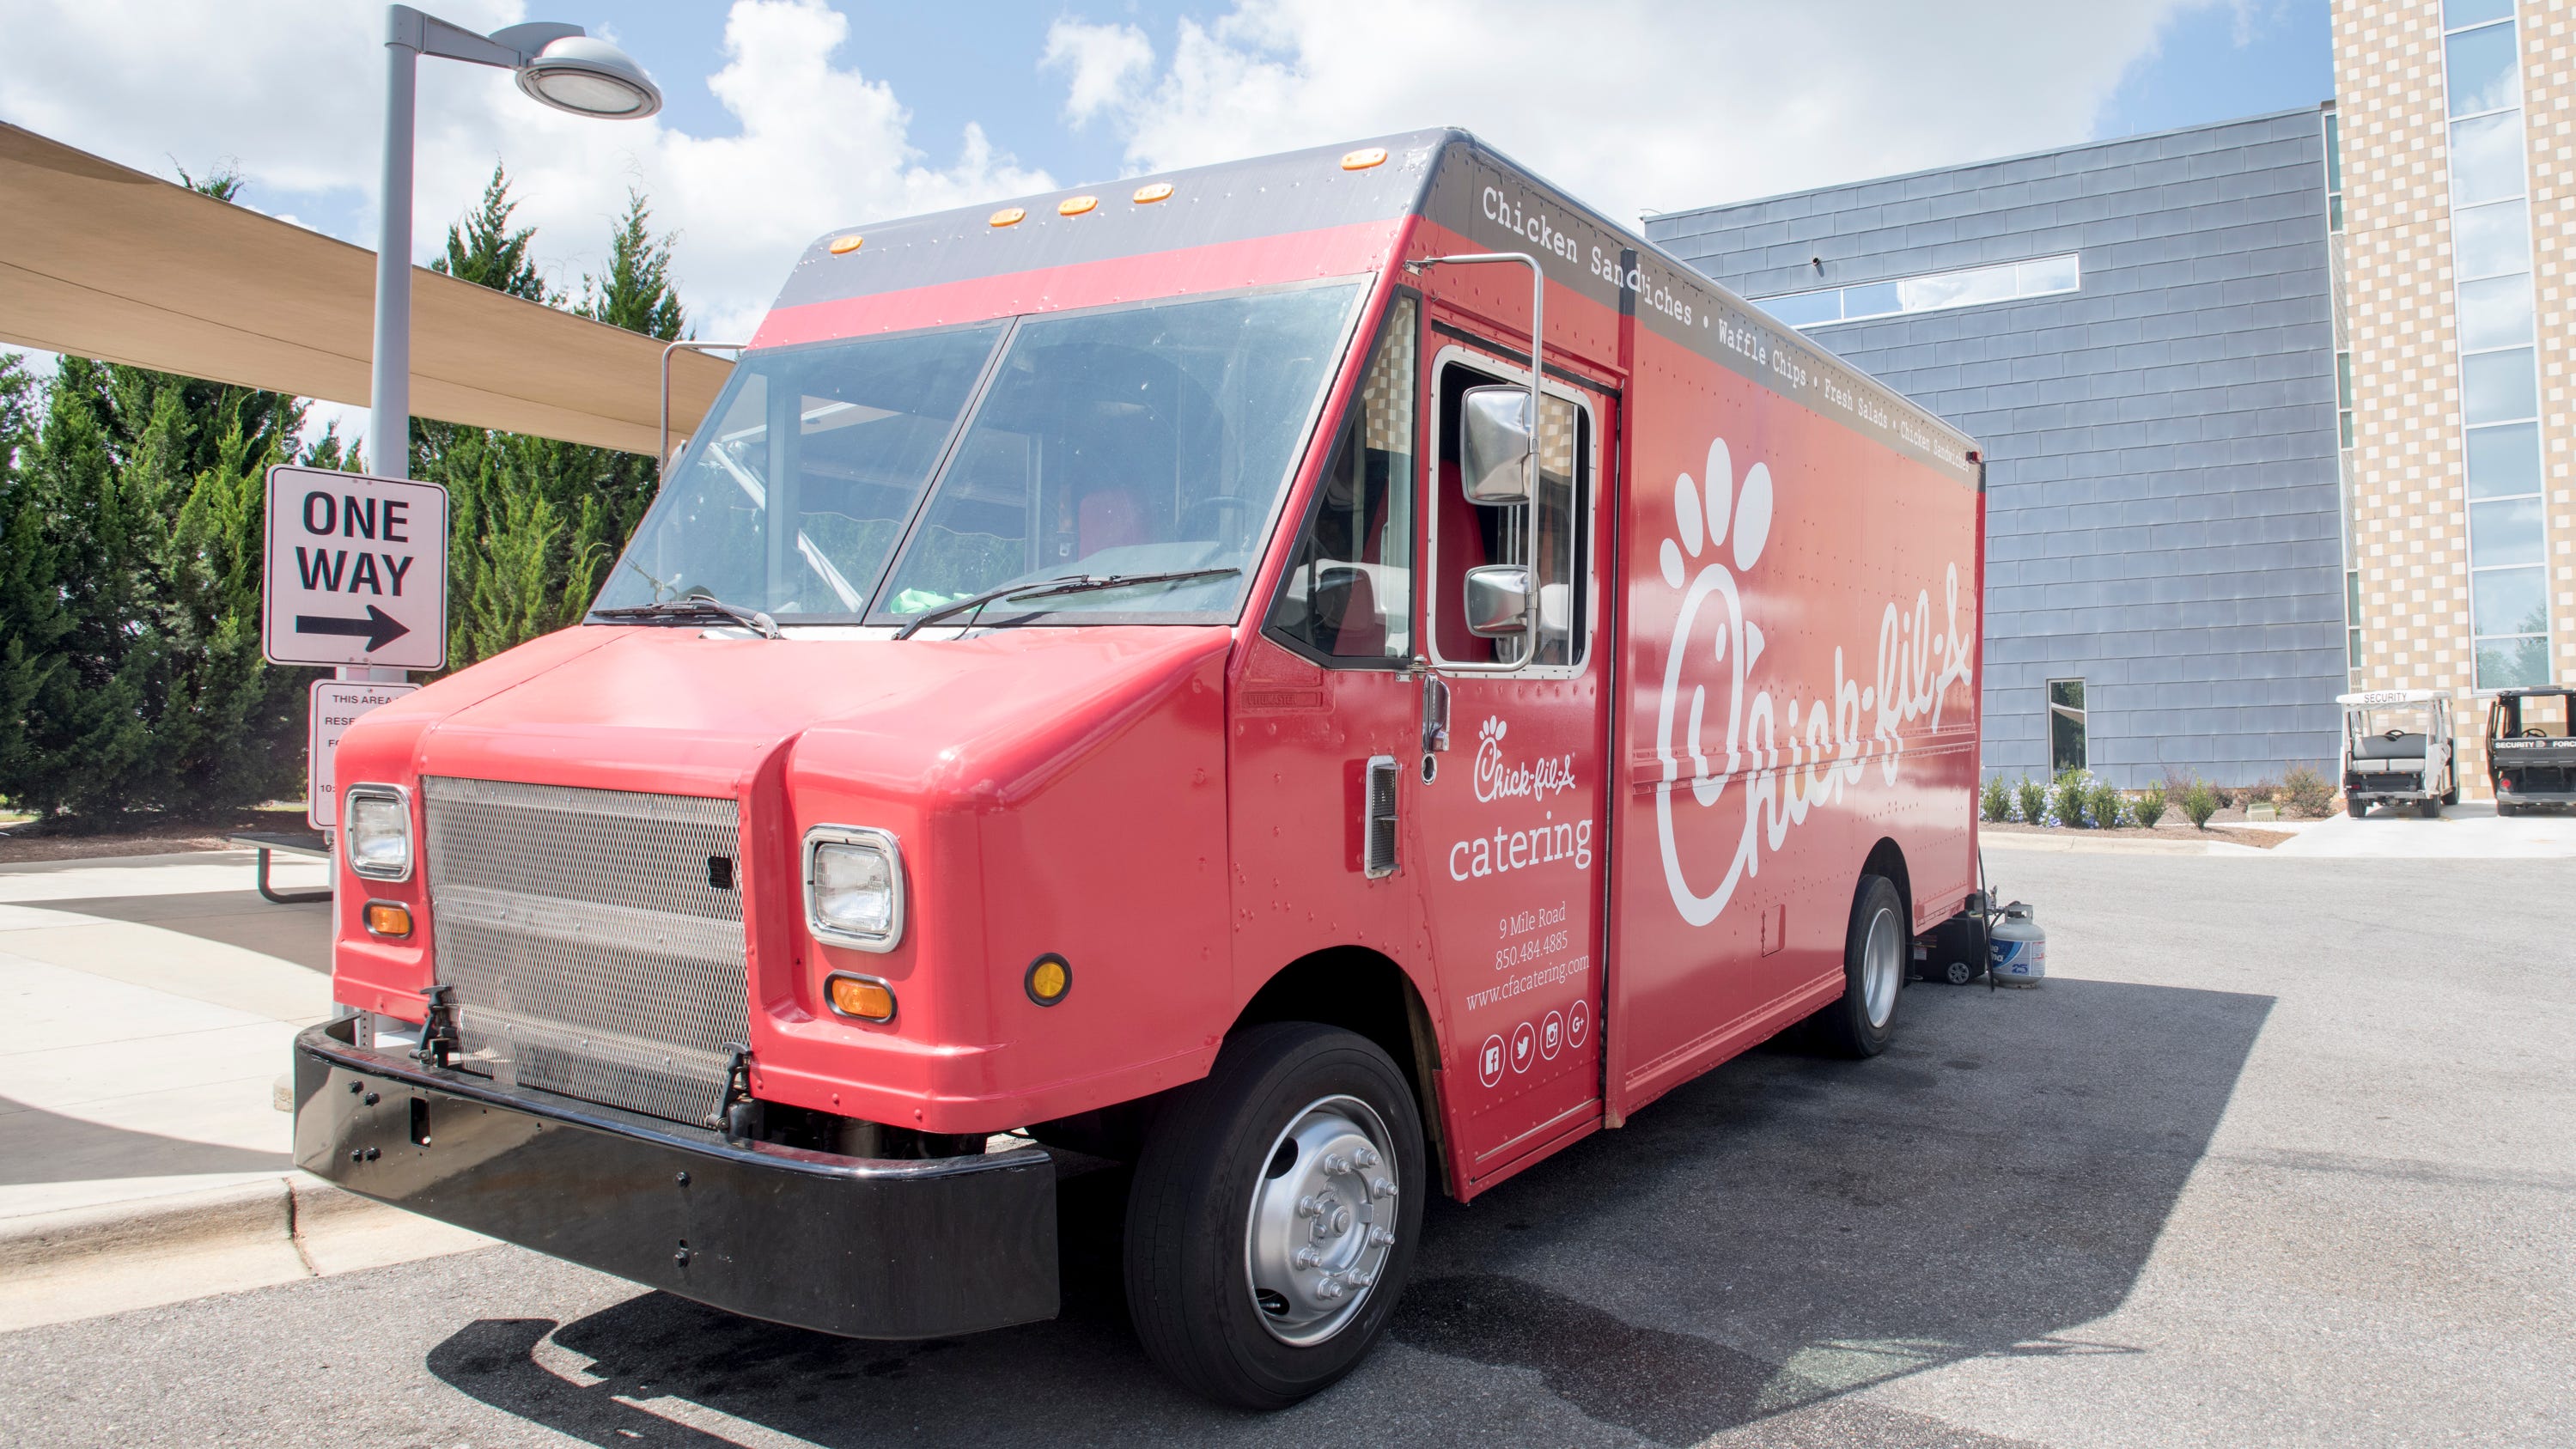 A ChickFilA food truck? Pensacola now has one